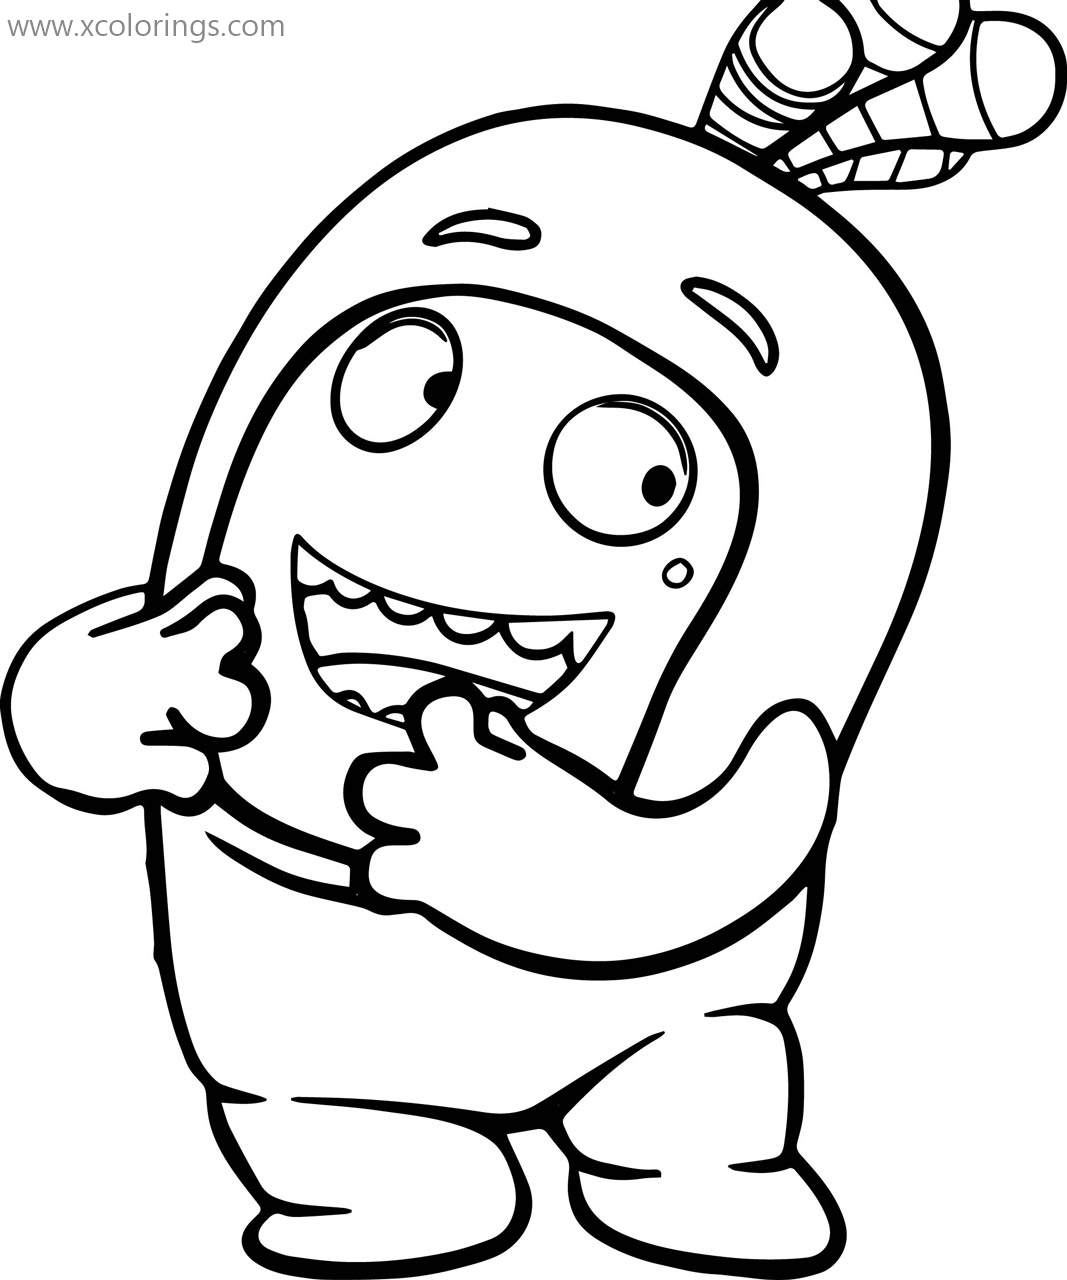 Oddbods Coloring Pages - Coloring Home